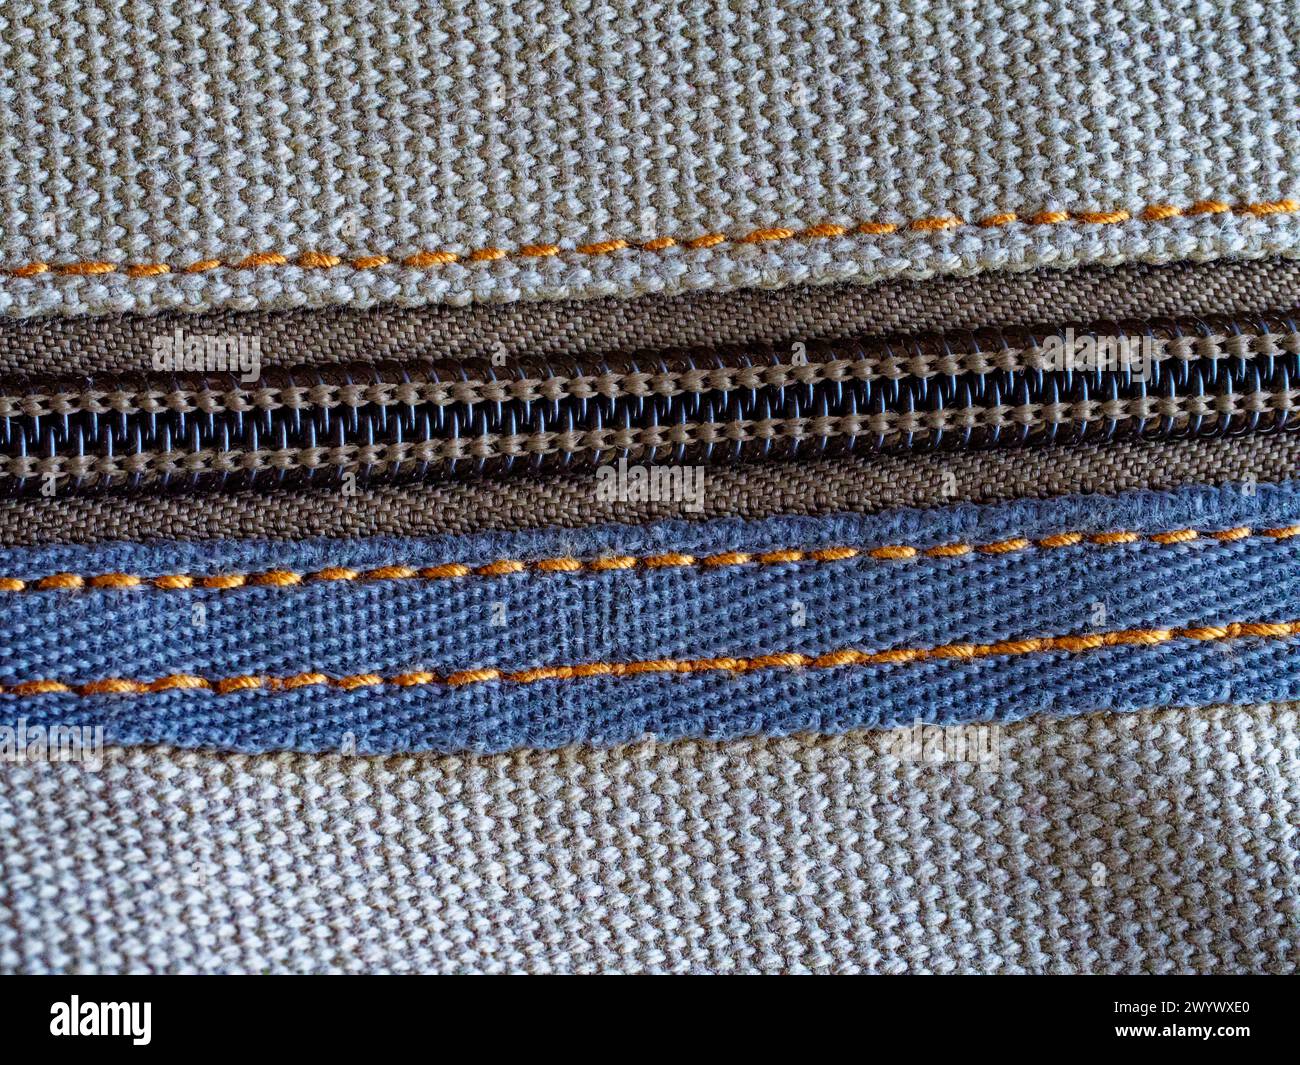 Gray fabric with a closed zipper, focusing on the intricate stitching detail. Stock Photo